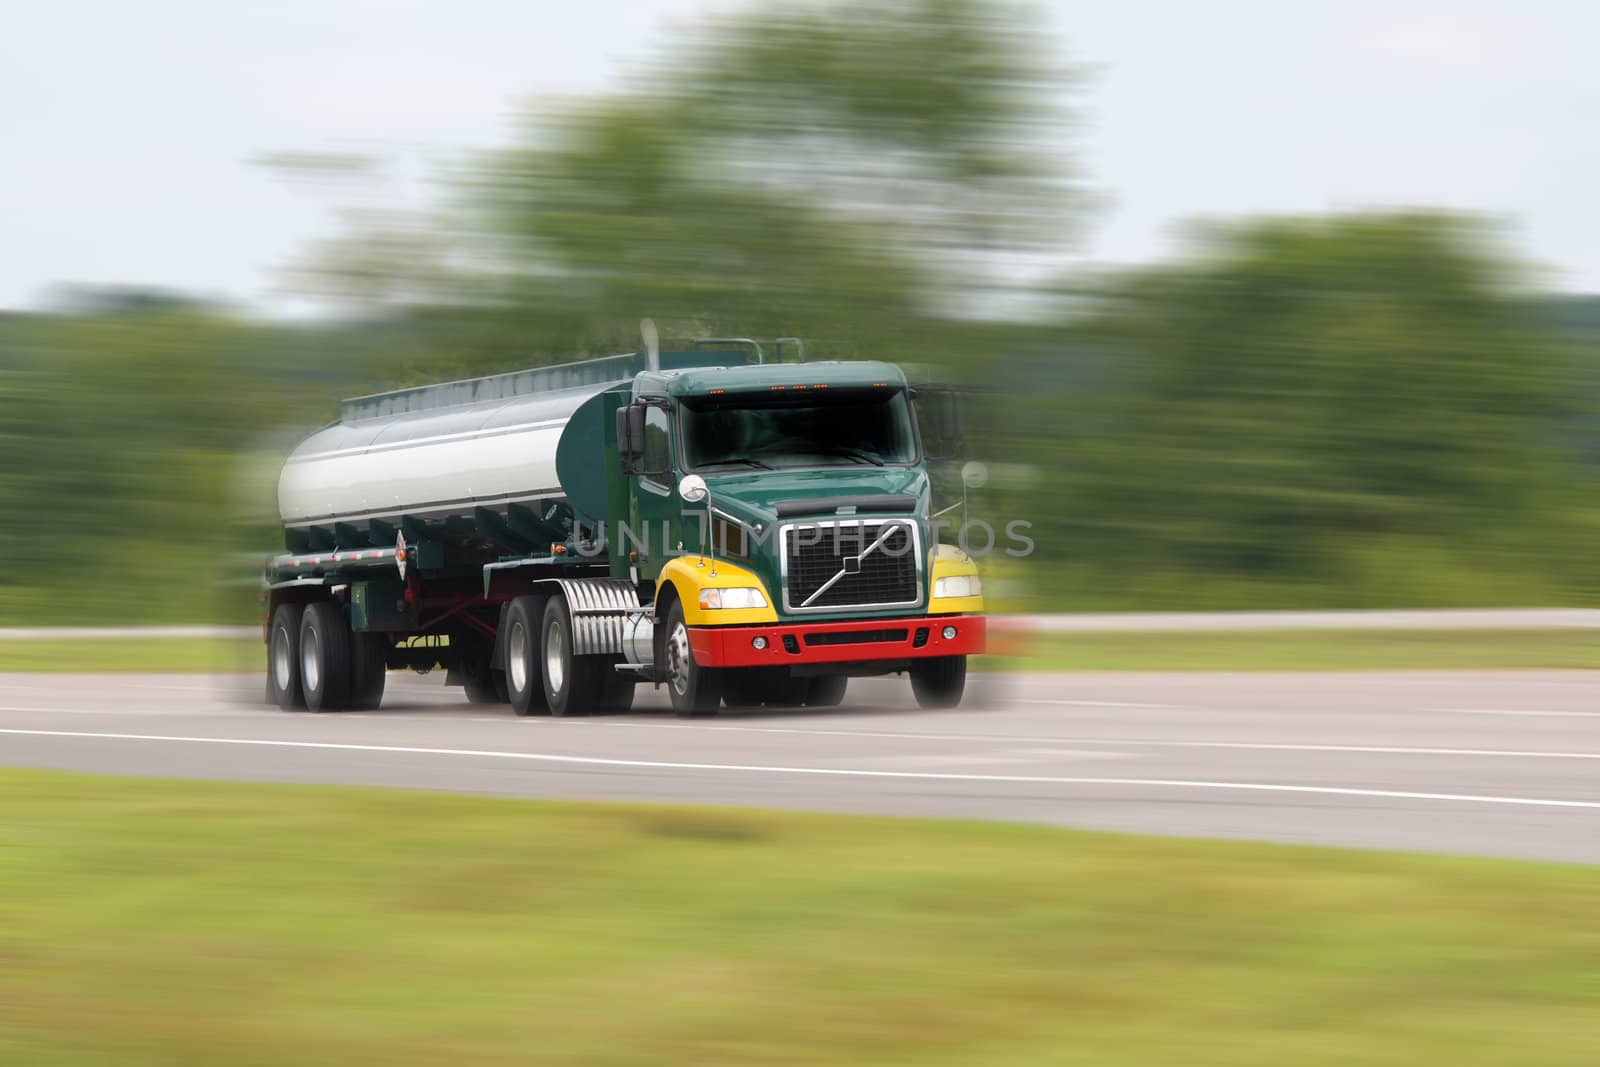 fuel truck in motion by gjdisplay